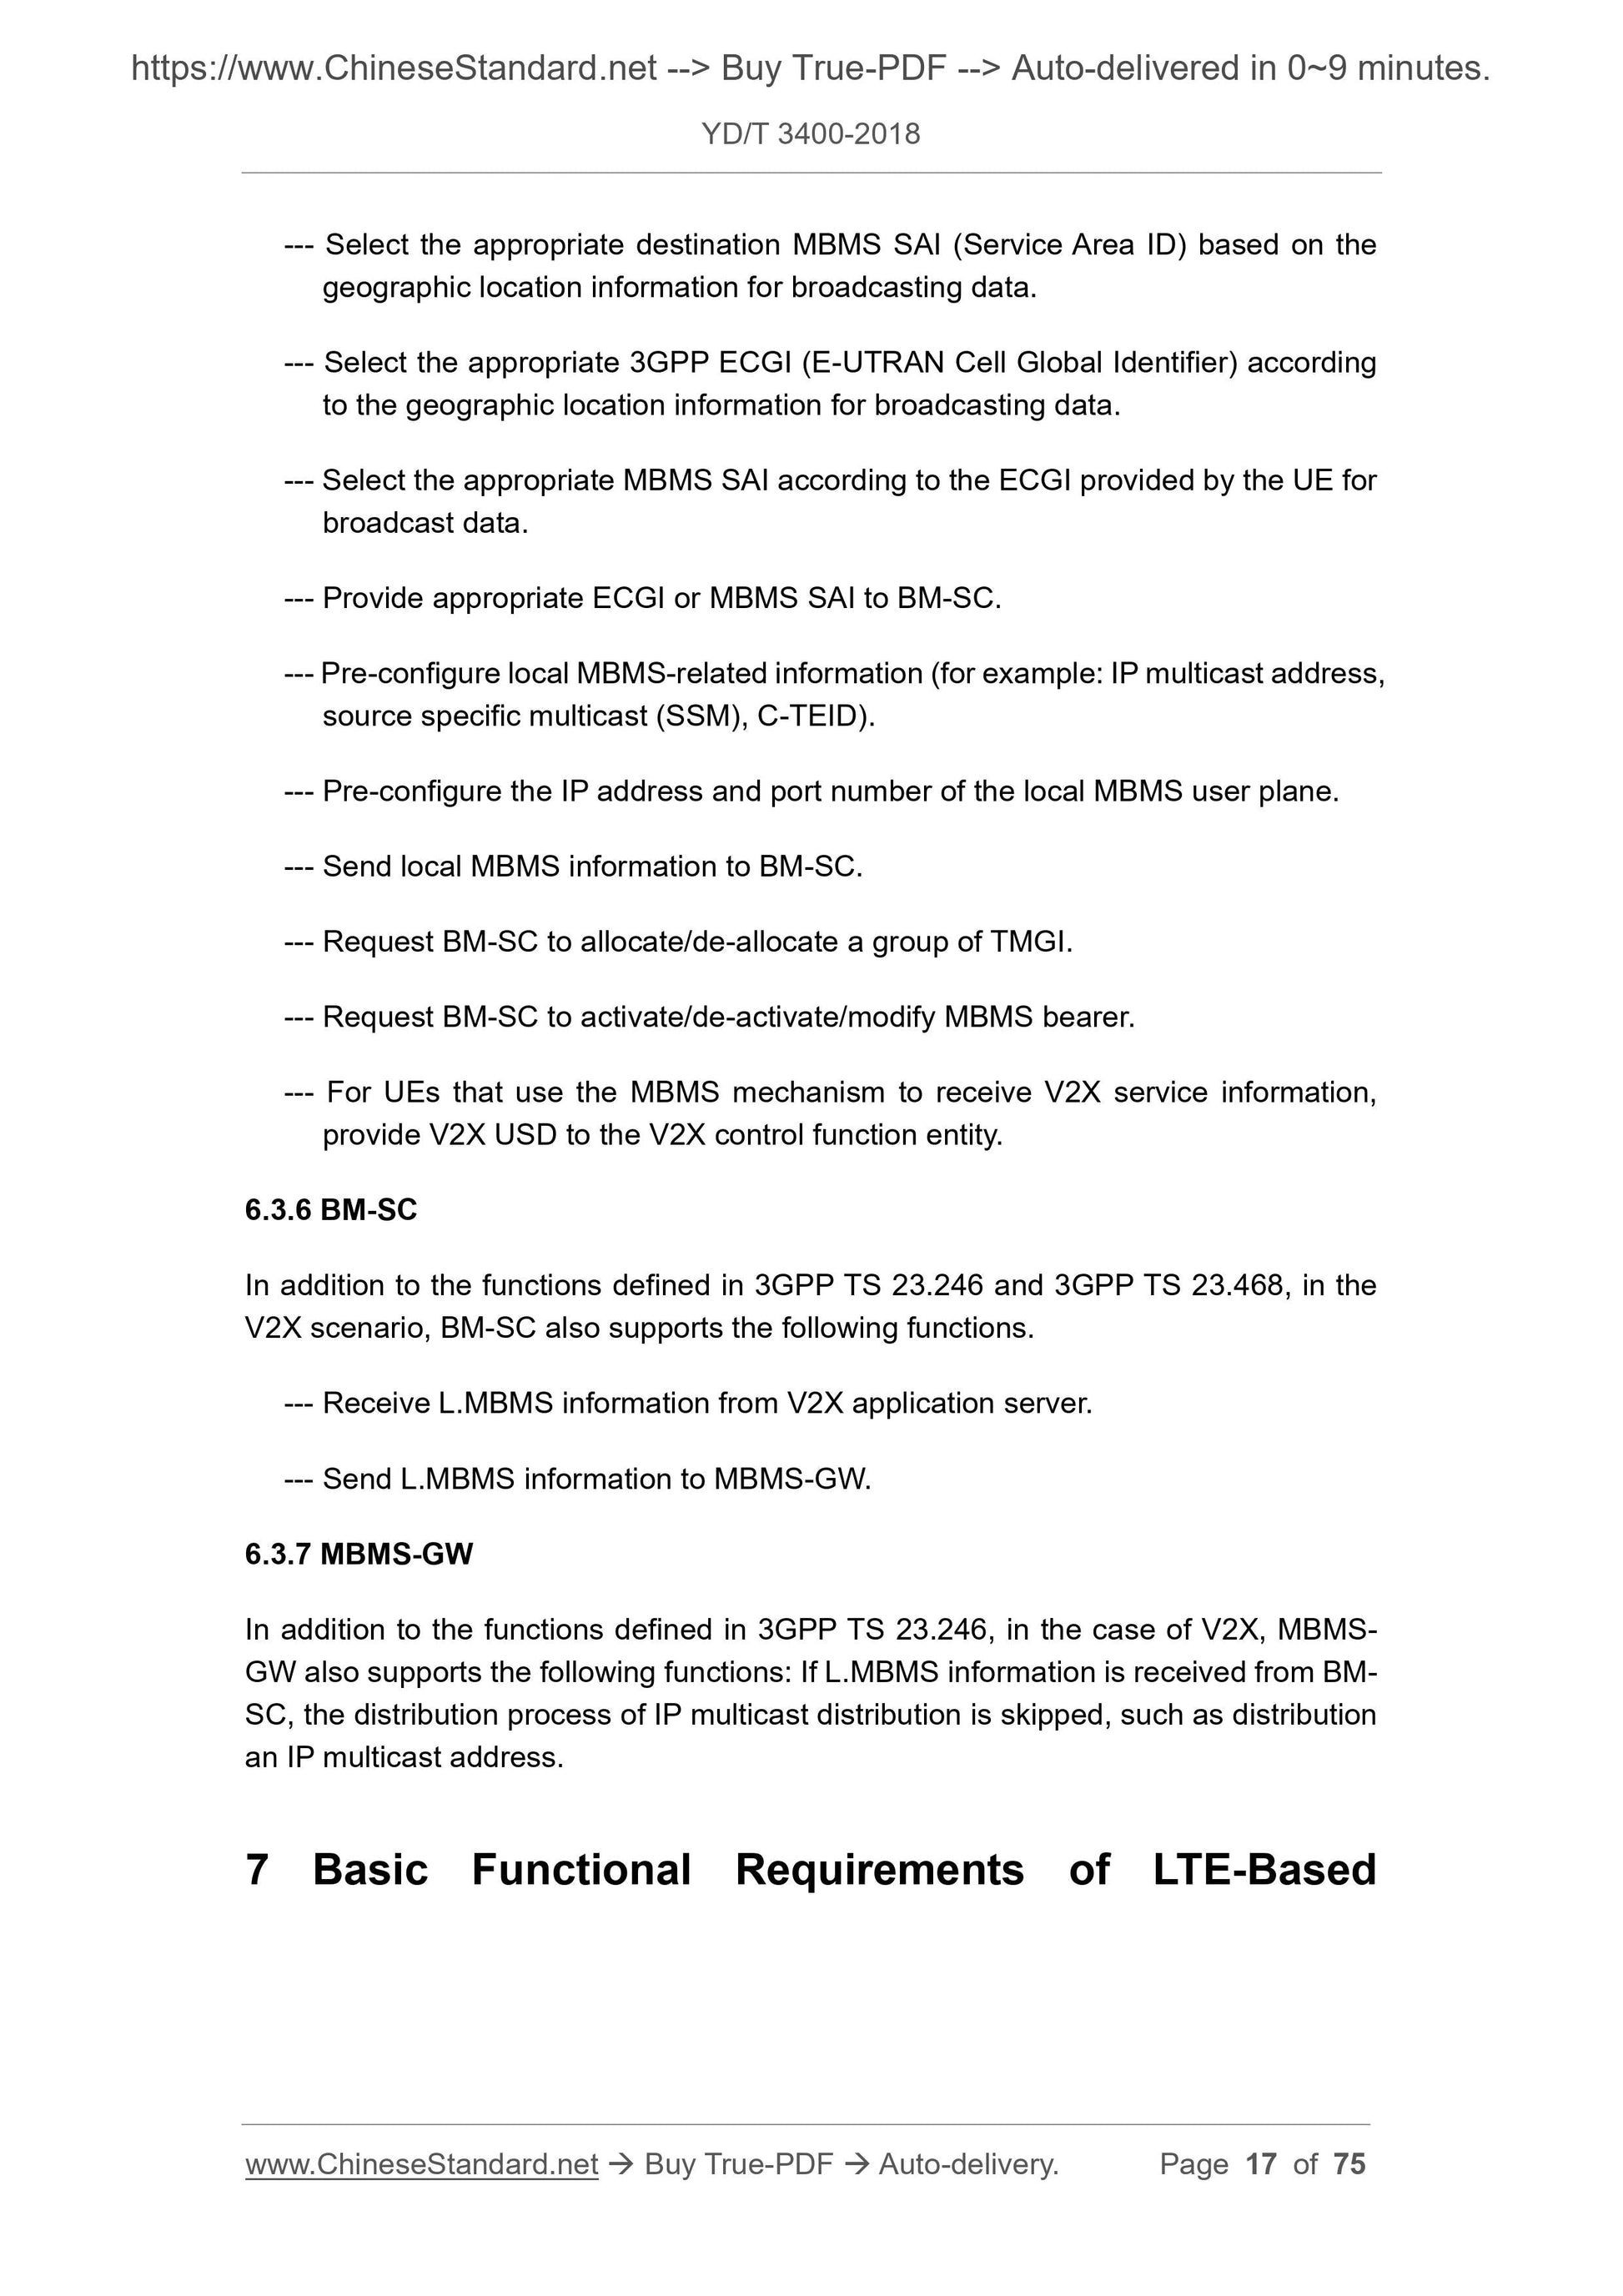 YD/T 3400-2018 Page 9